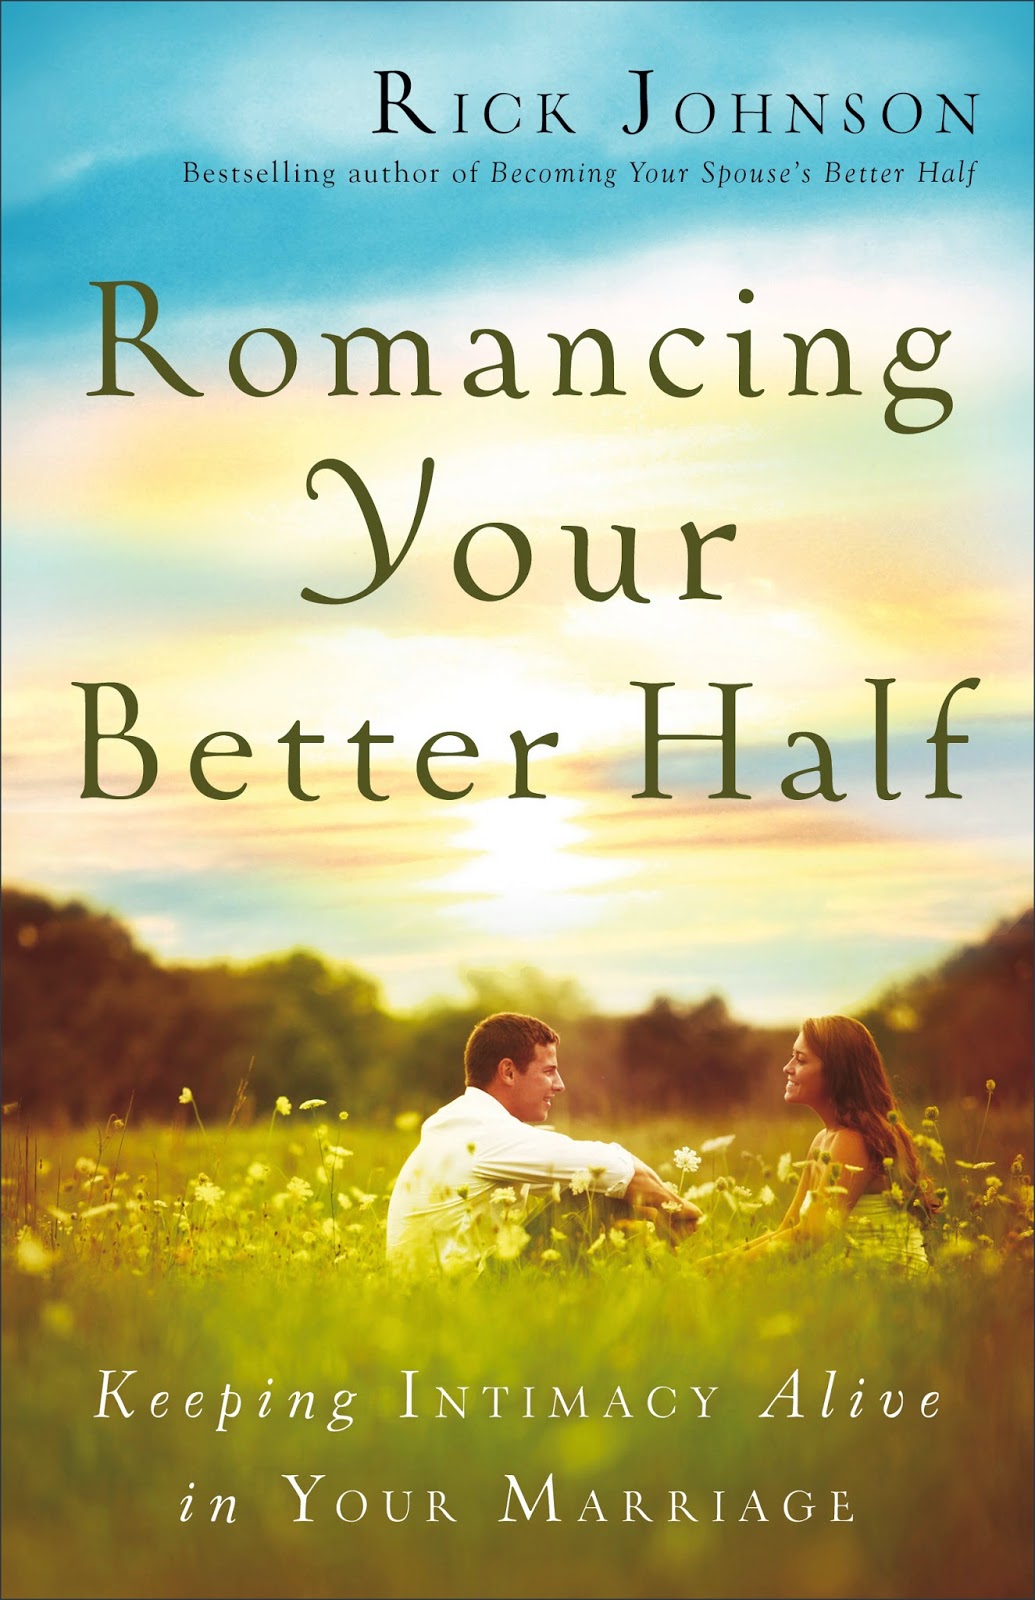 Romancing Your Better Half by Rick Johnson